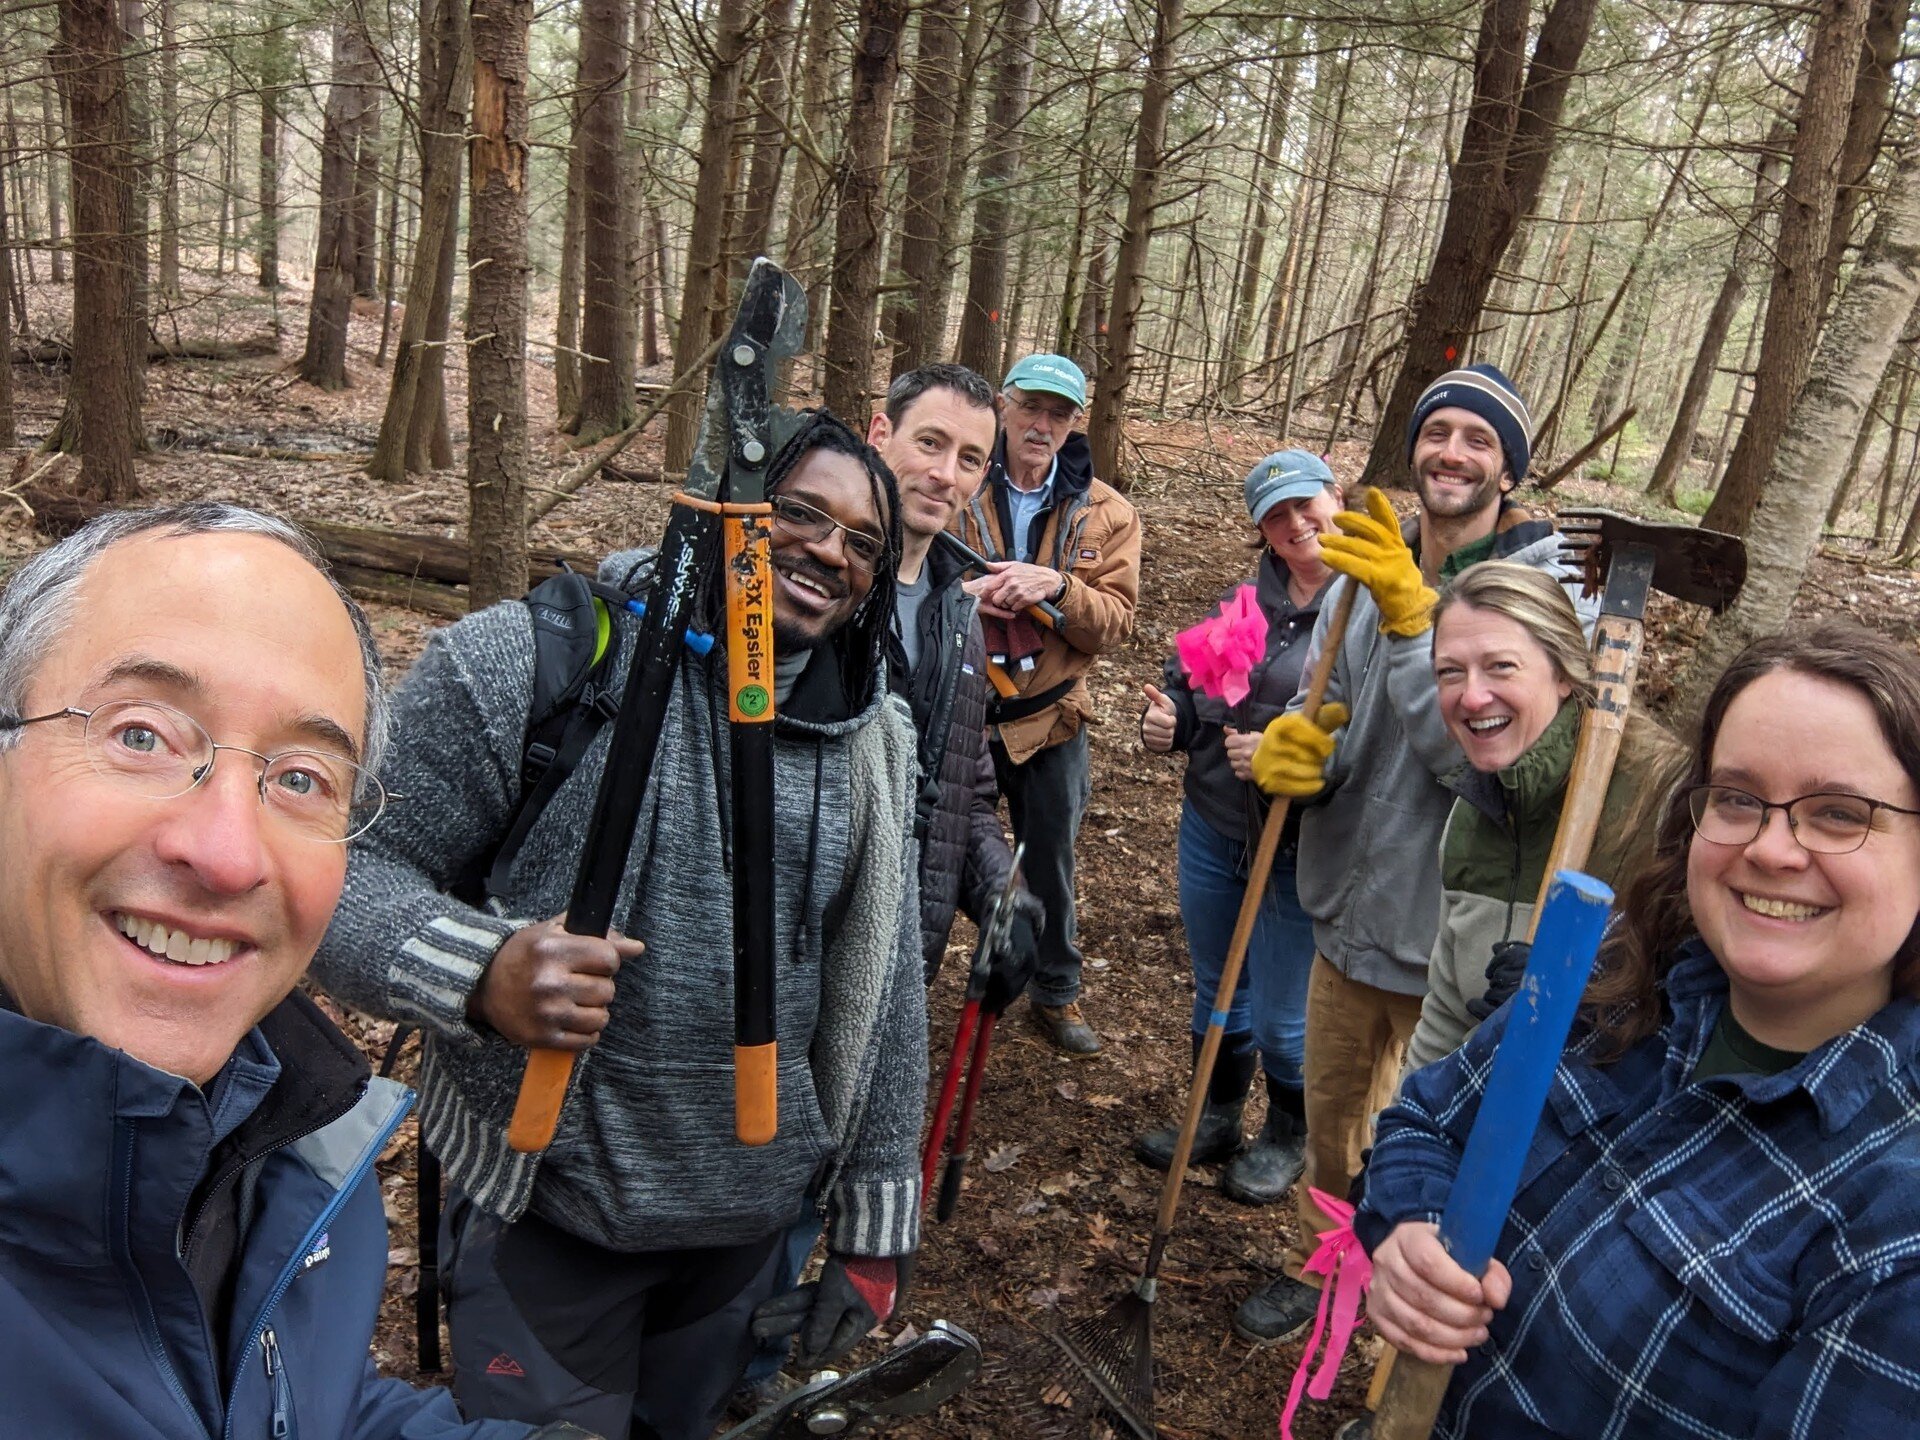 What a fabulous turnout for our first volunteer day of the season! 

This great group helped clear a new trail and remove invasive plants at Underwood Springs Forest. The trail they were working on is still under construction, but once it's done it w